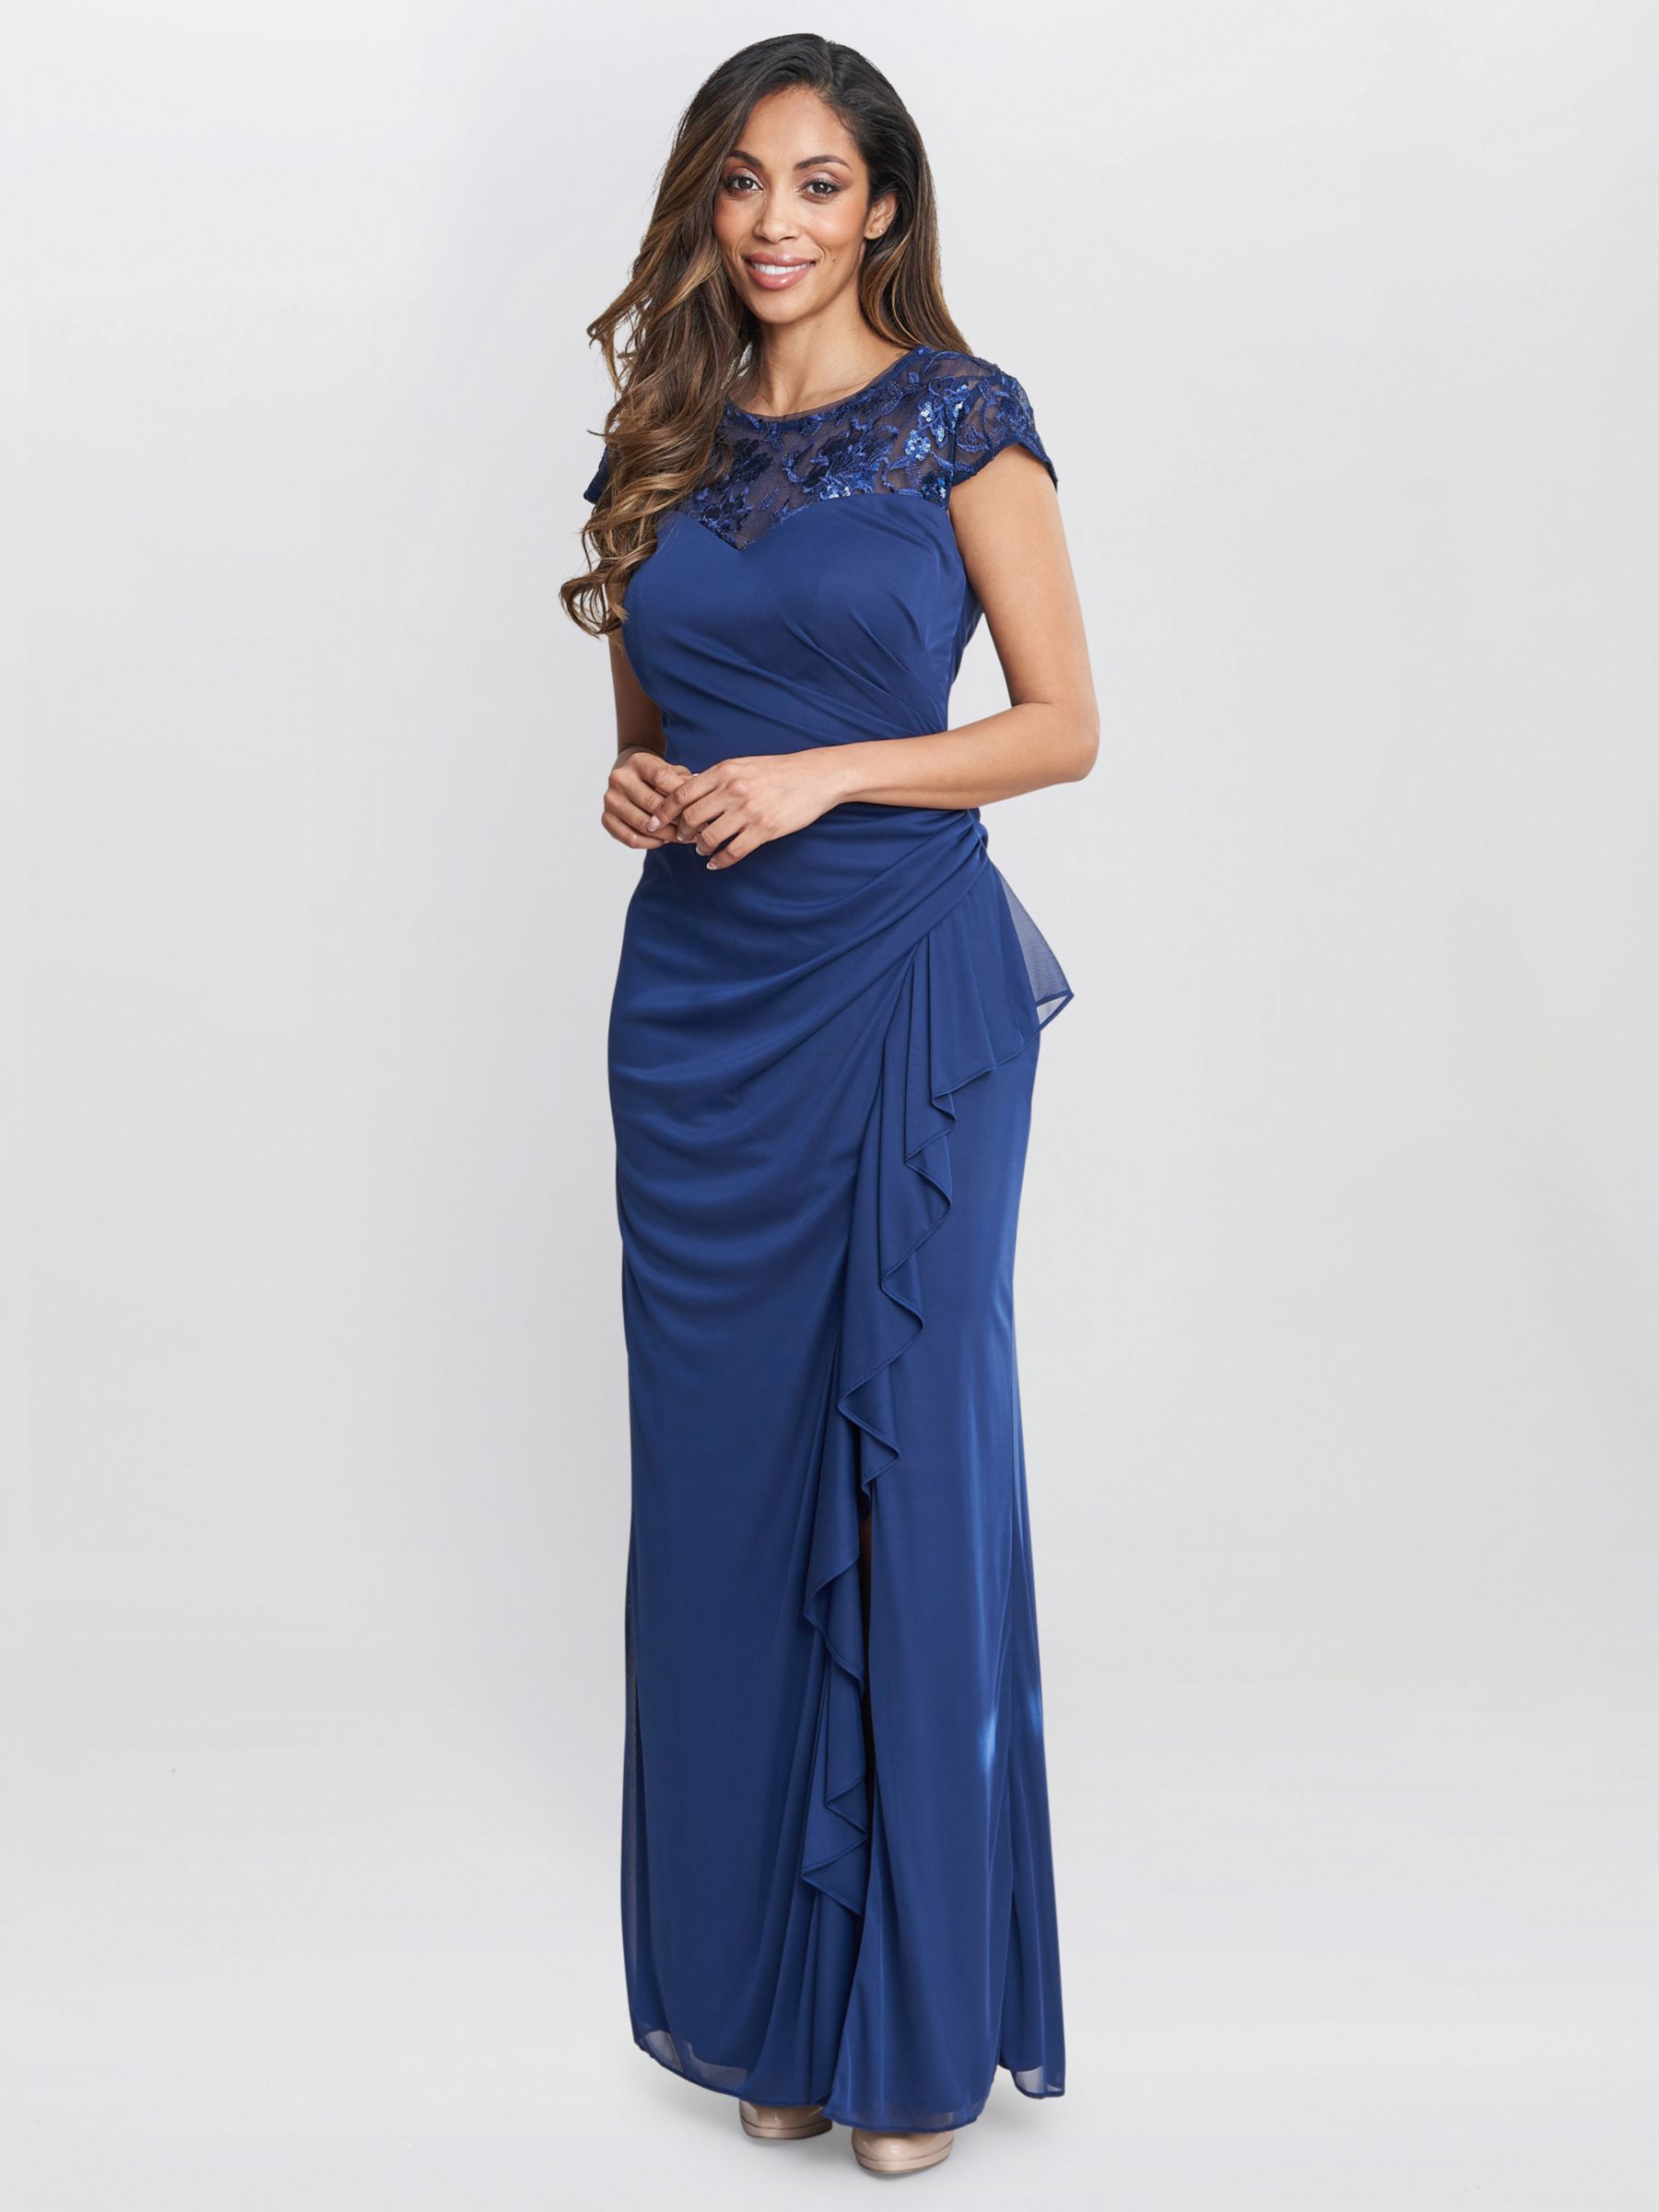 Buy Gina Bacconi Cecilia Maxi Dress Embroidered Illusion Neckline, Navy Online at johnlewis.com